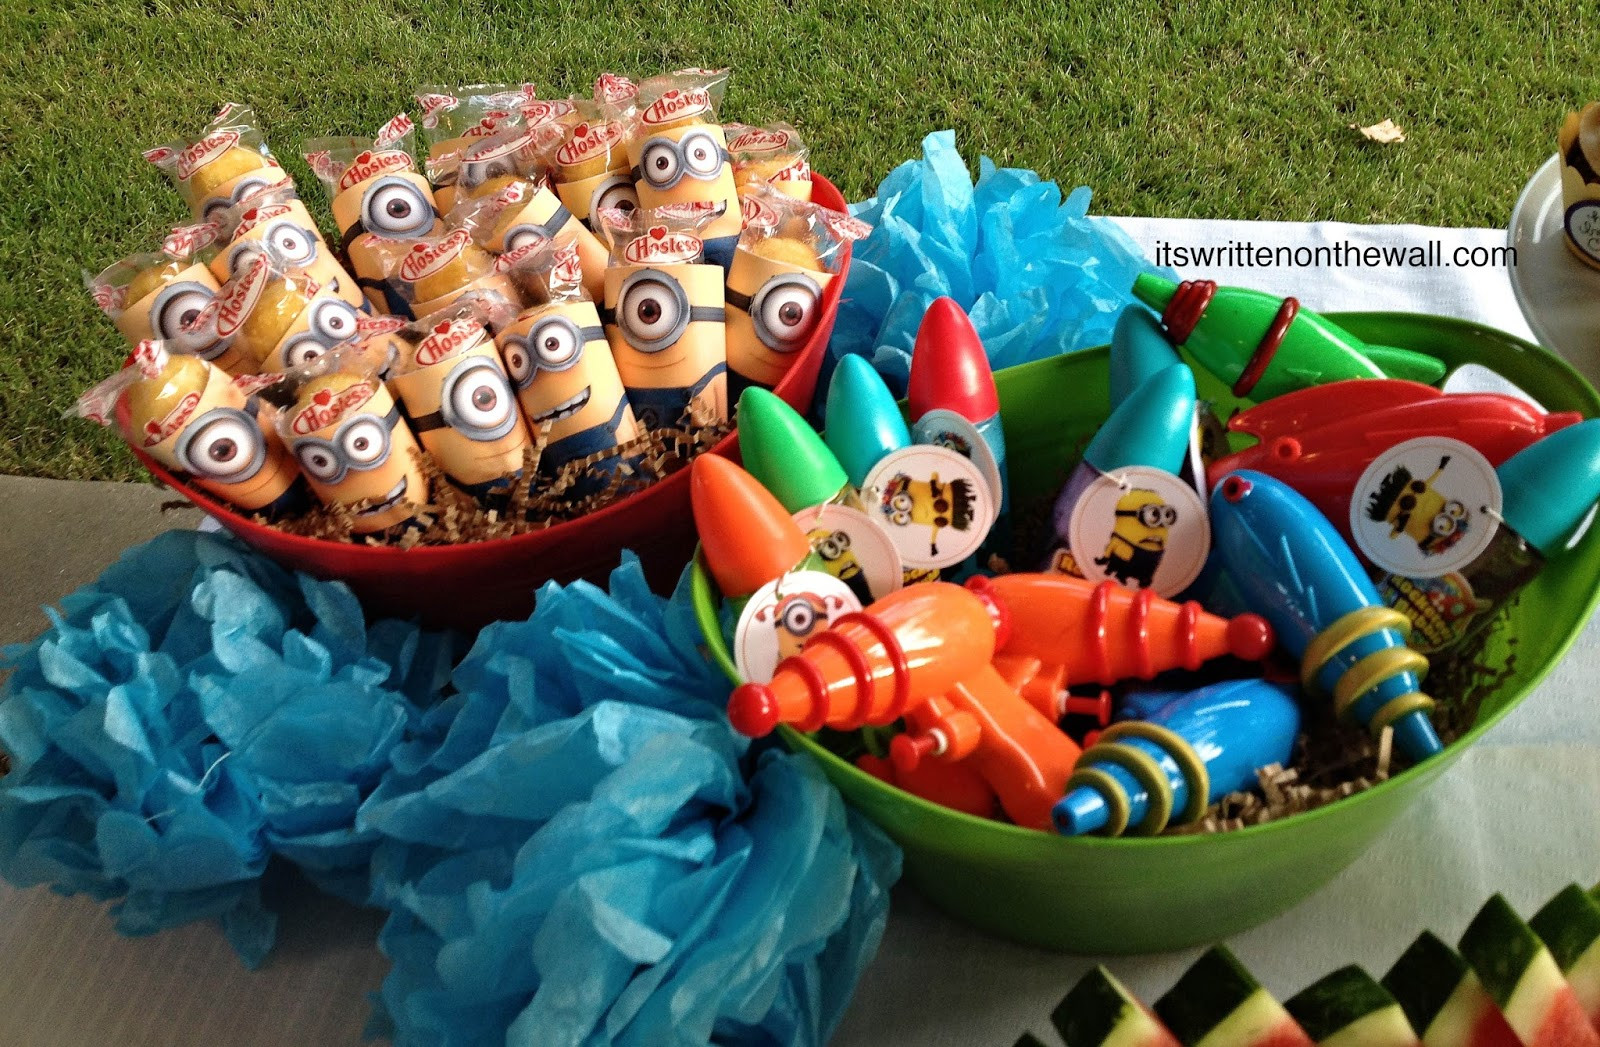 Best ideas about Minions Birthday Party
. Save or Pin It s Written on the Wall Despicable Me Minions Birthday Now.